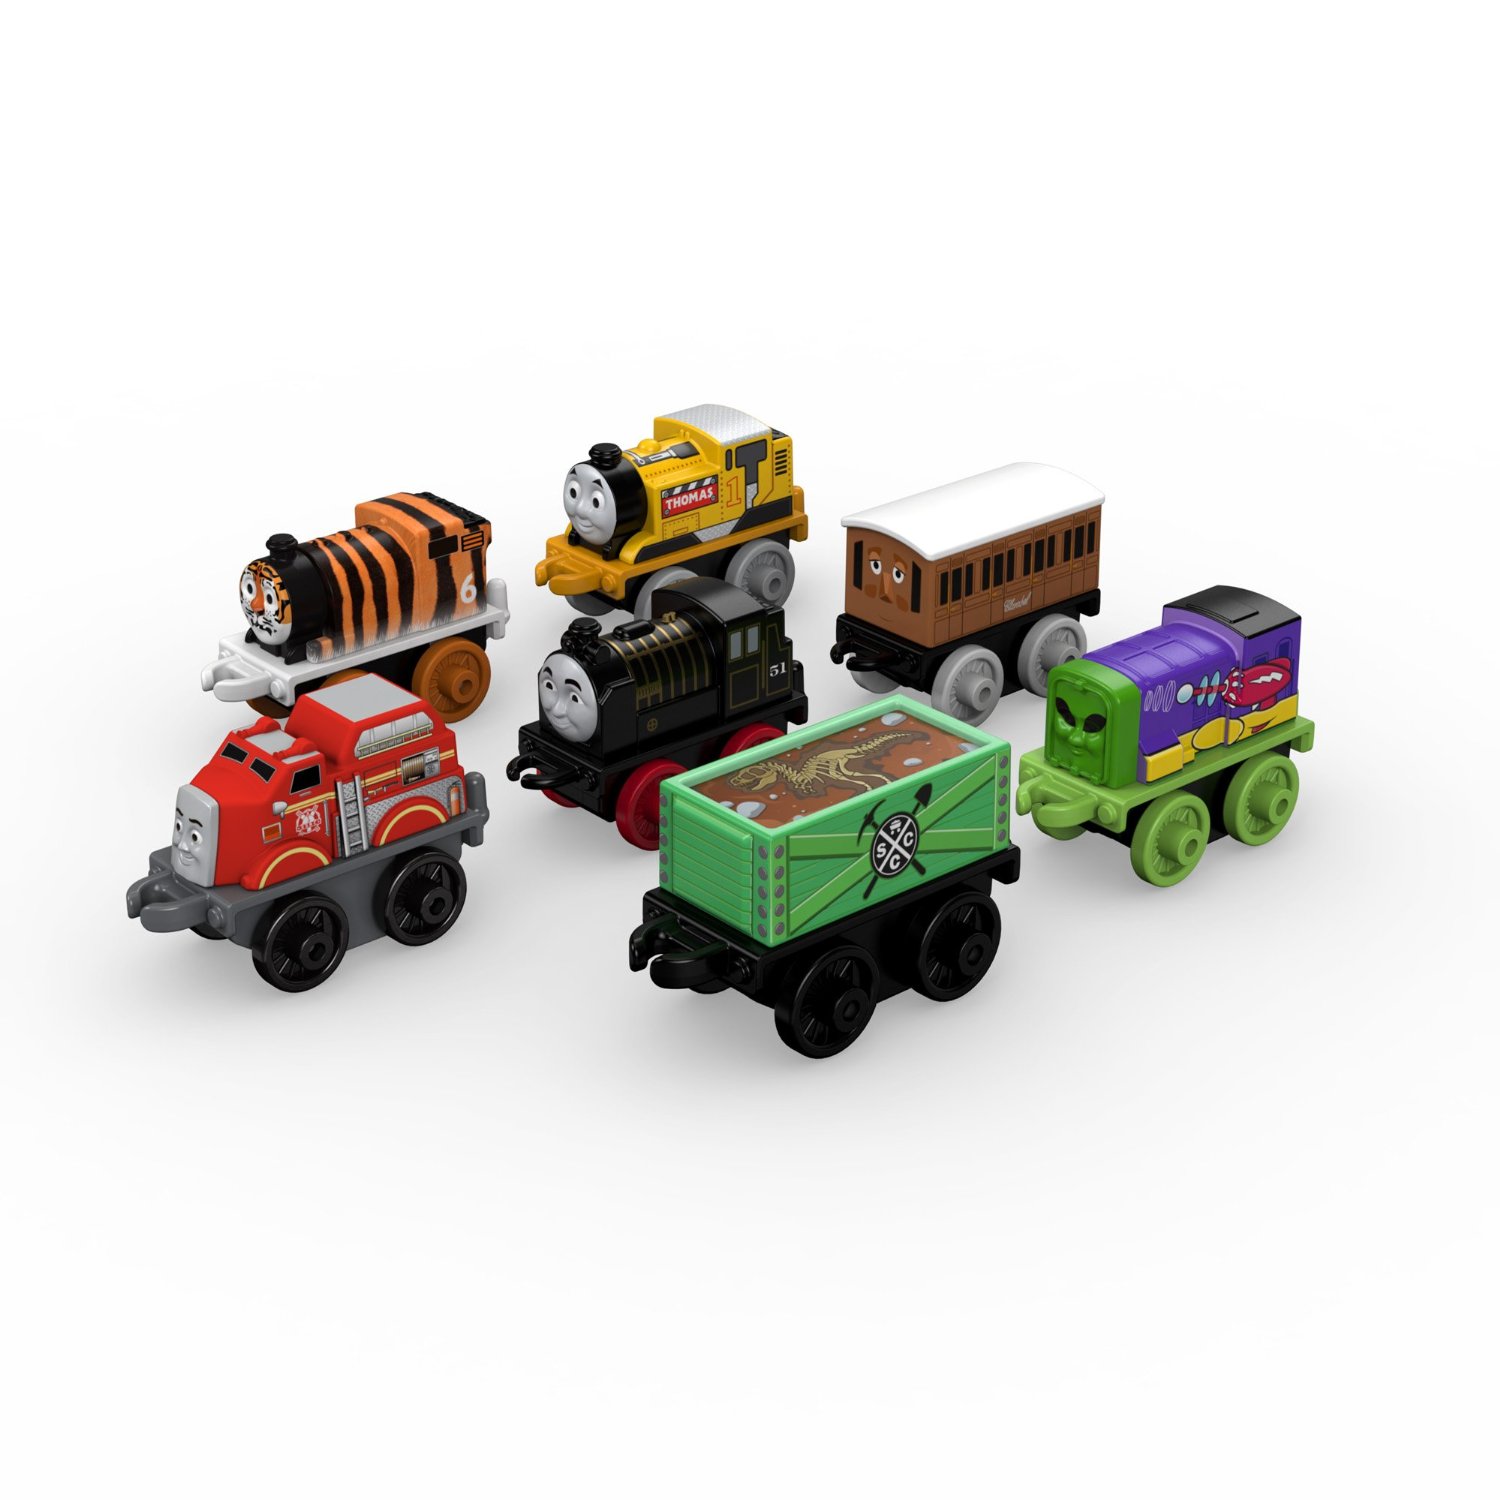 Thomas And Friends Minis 2017